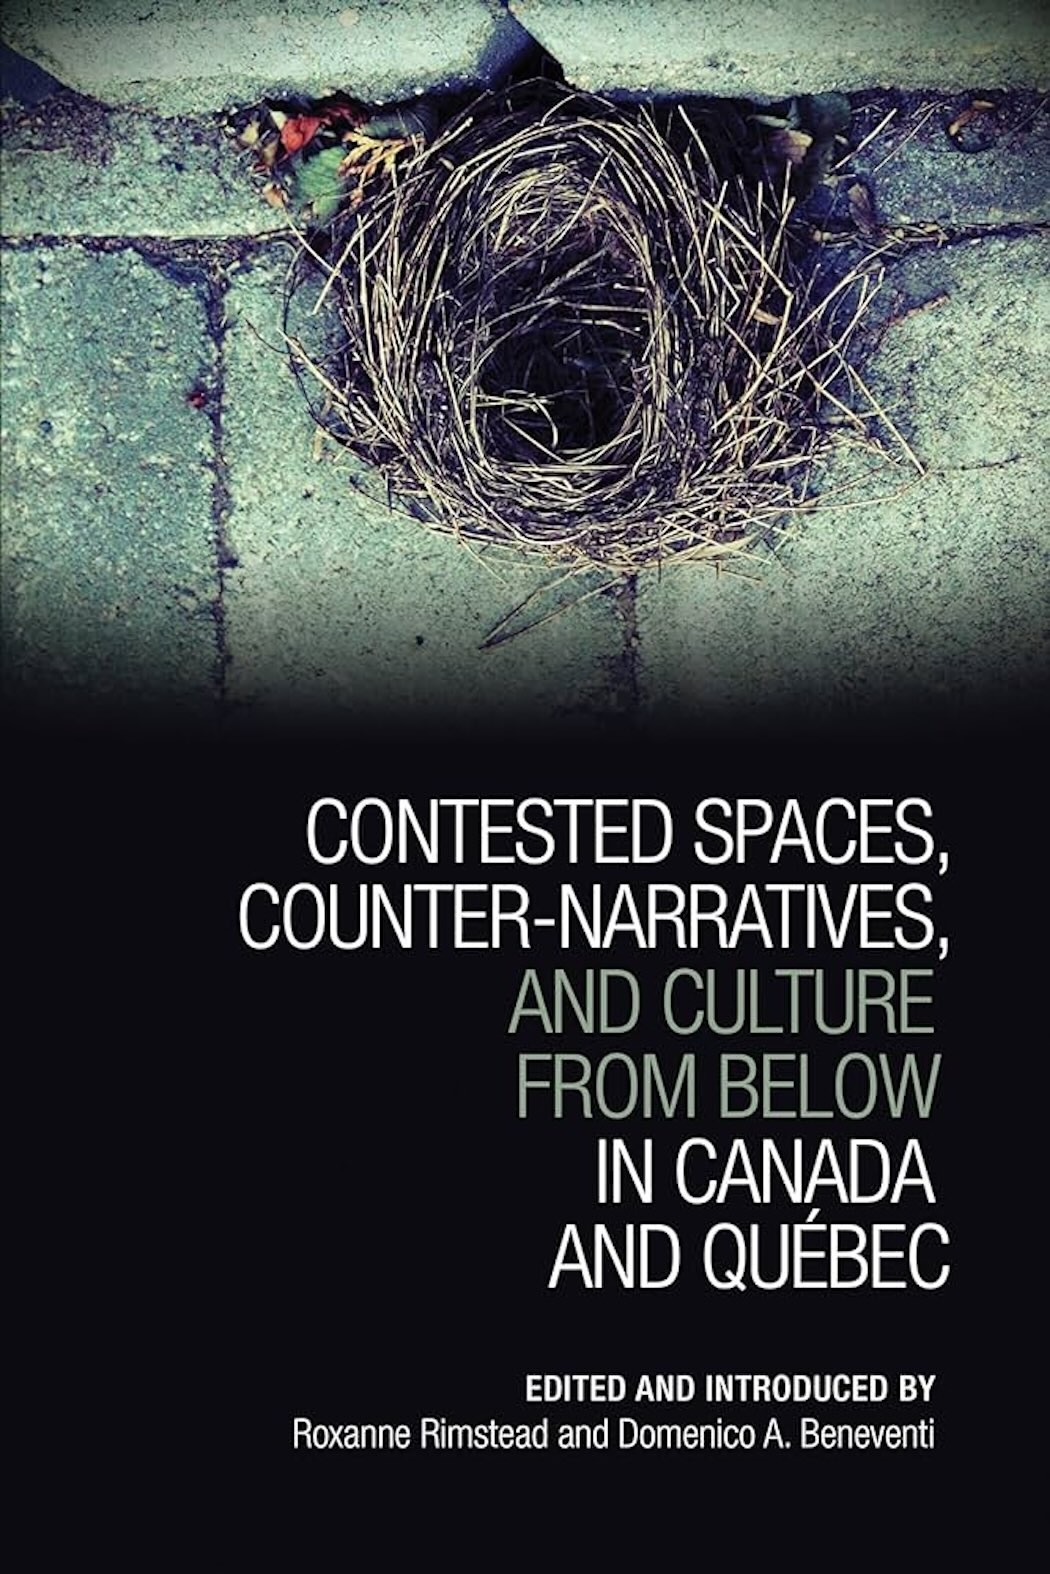 Cover Image of Contested Spaces, Counter-narratives, and Culture from Below in Canada and Quebec